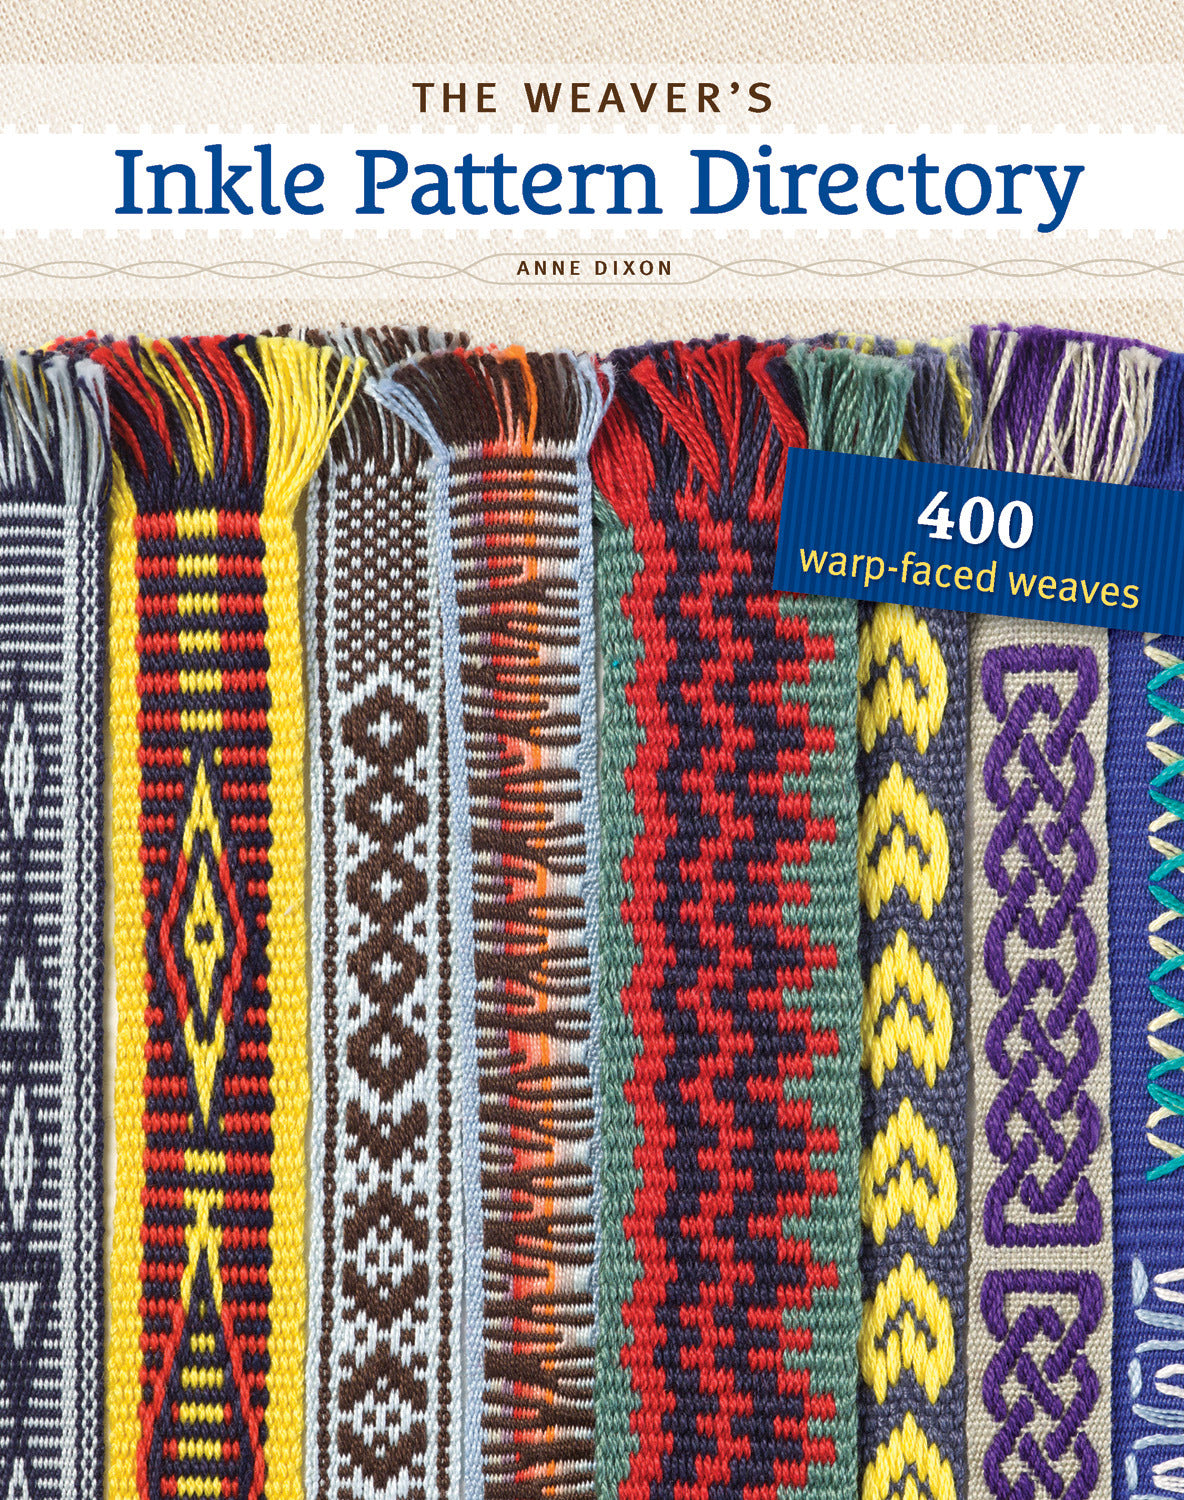 The Weaver's Inkle Pattern Directory